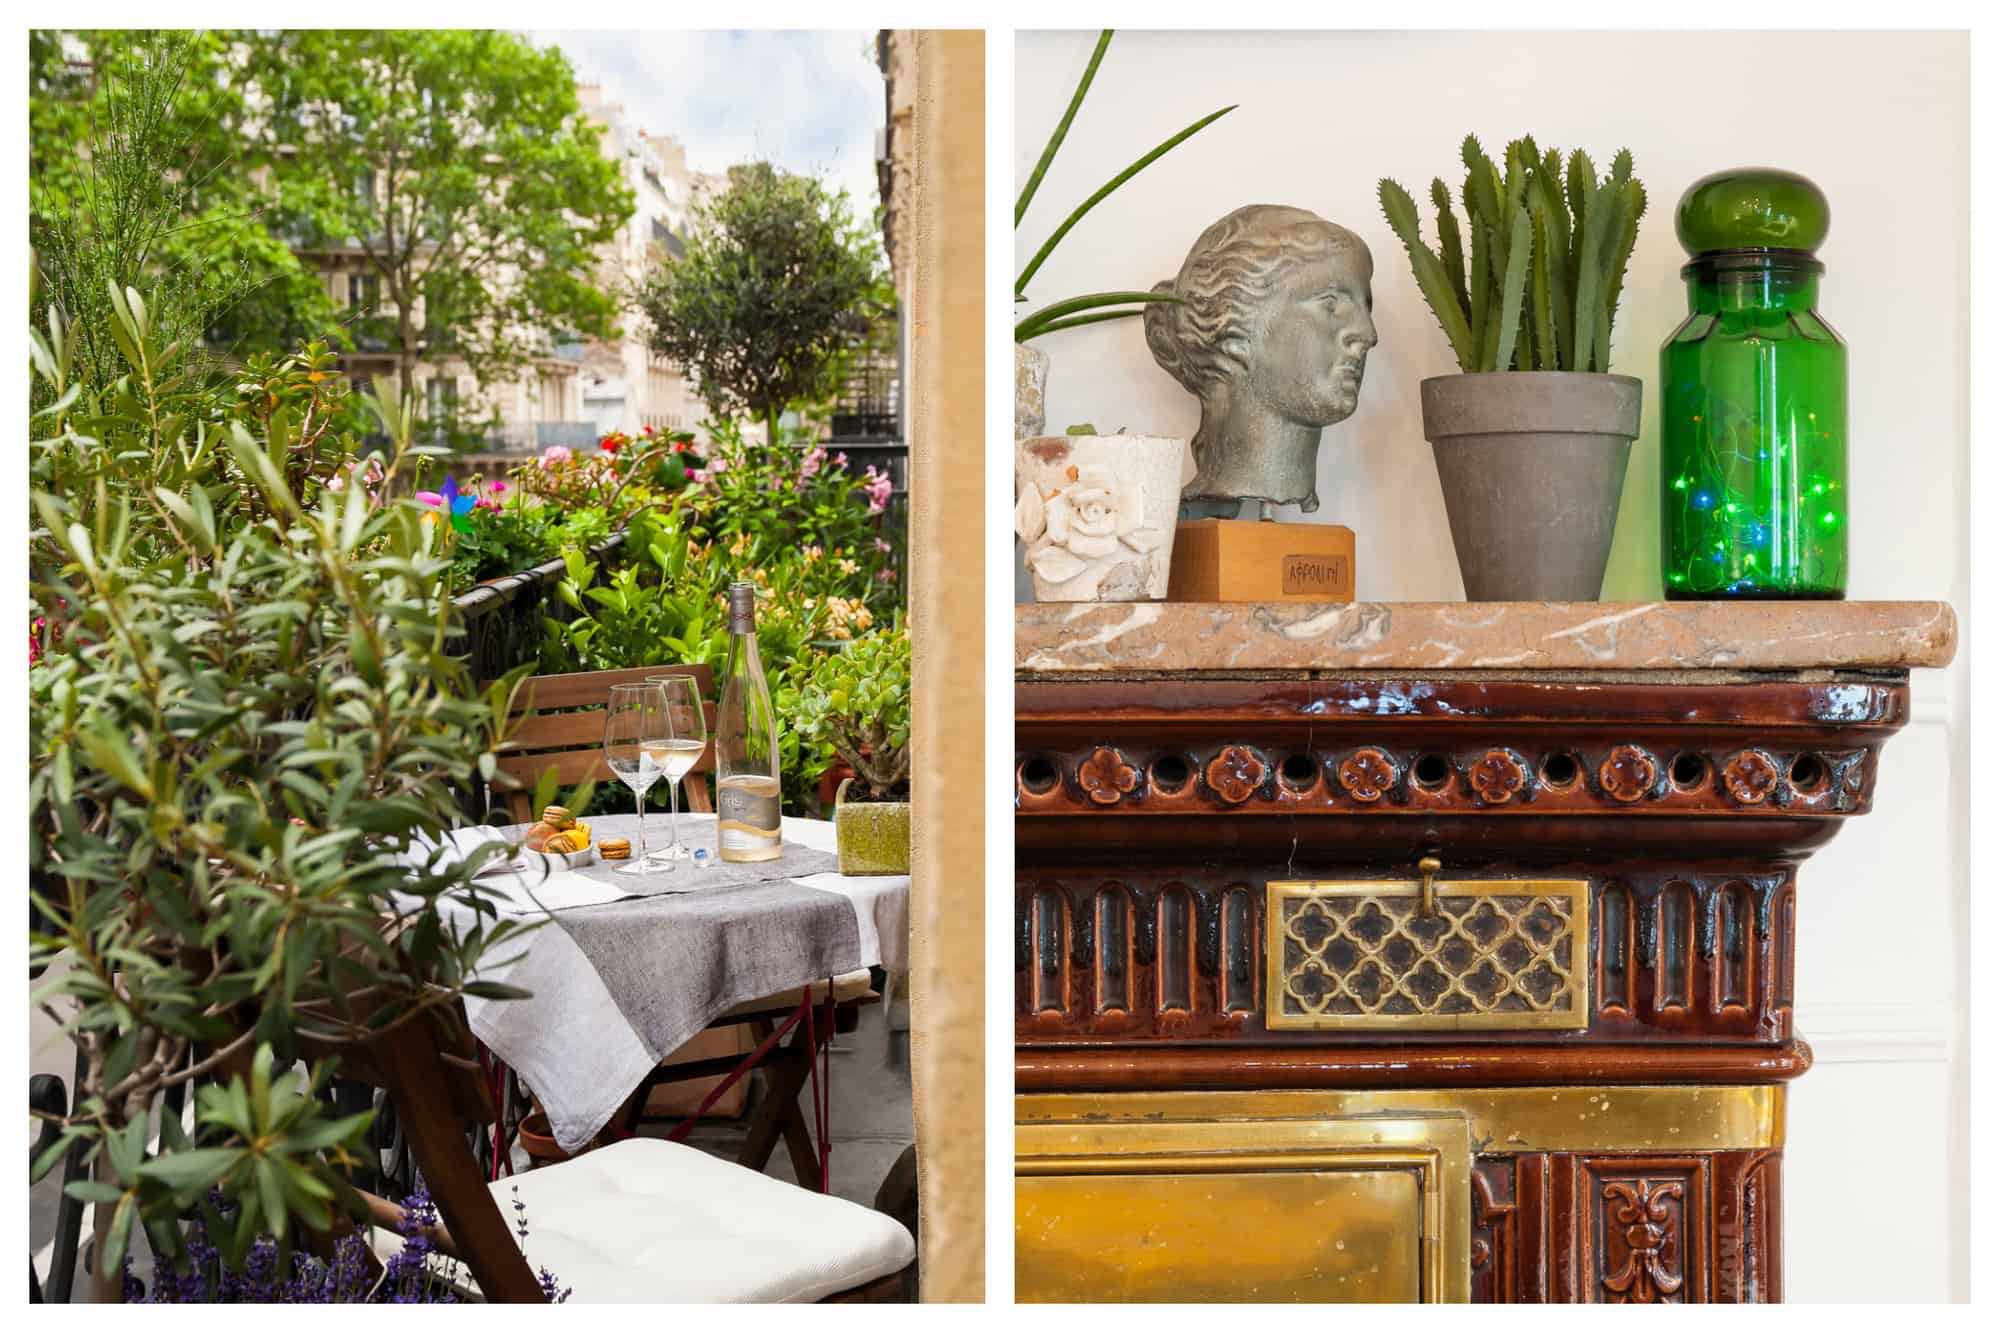 Left: A picture of a lush Parisian balcony full of plants and flowers on a beautiful summer day. A table is set with chairs, a bottle and 2 glasses of rosé, and macaroons. Right: A picture of a classic Parisian fireplace that is decorated with 3 pots of plants (cactus, aloe vera, and a succulent), a green bottle with fairy lights inside and a goddess paper weight.  